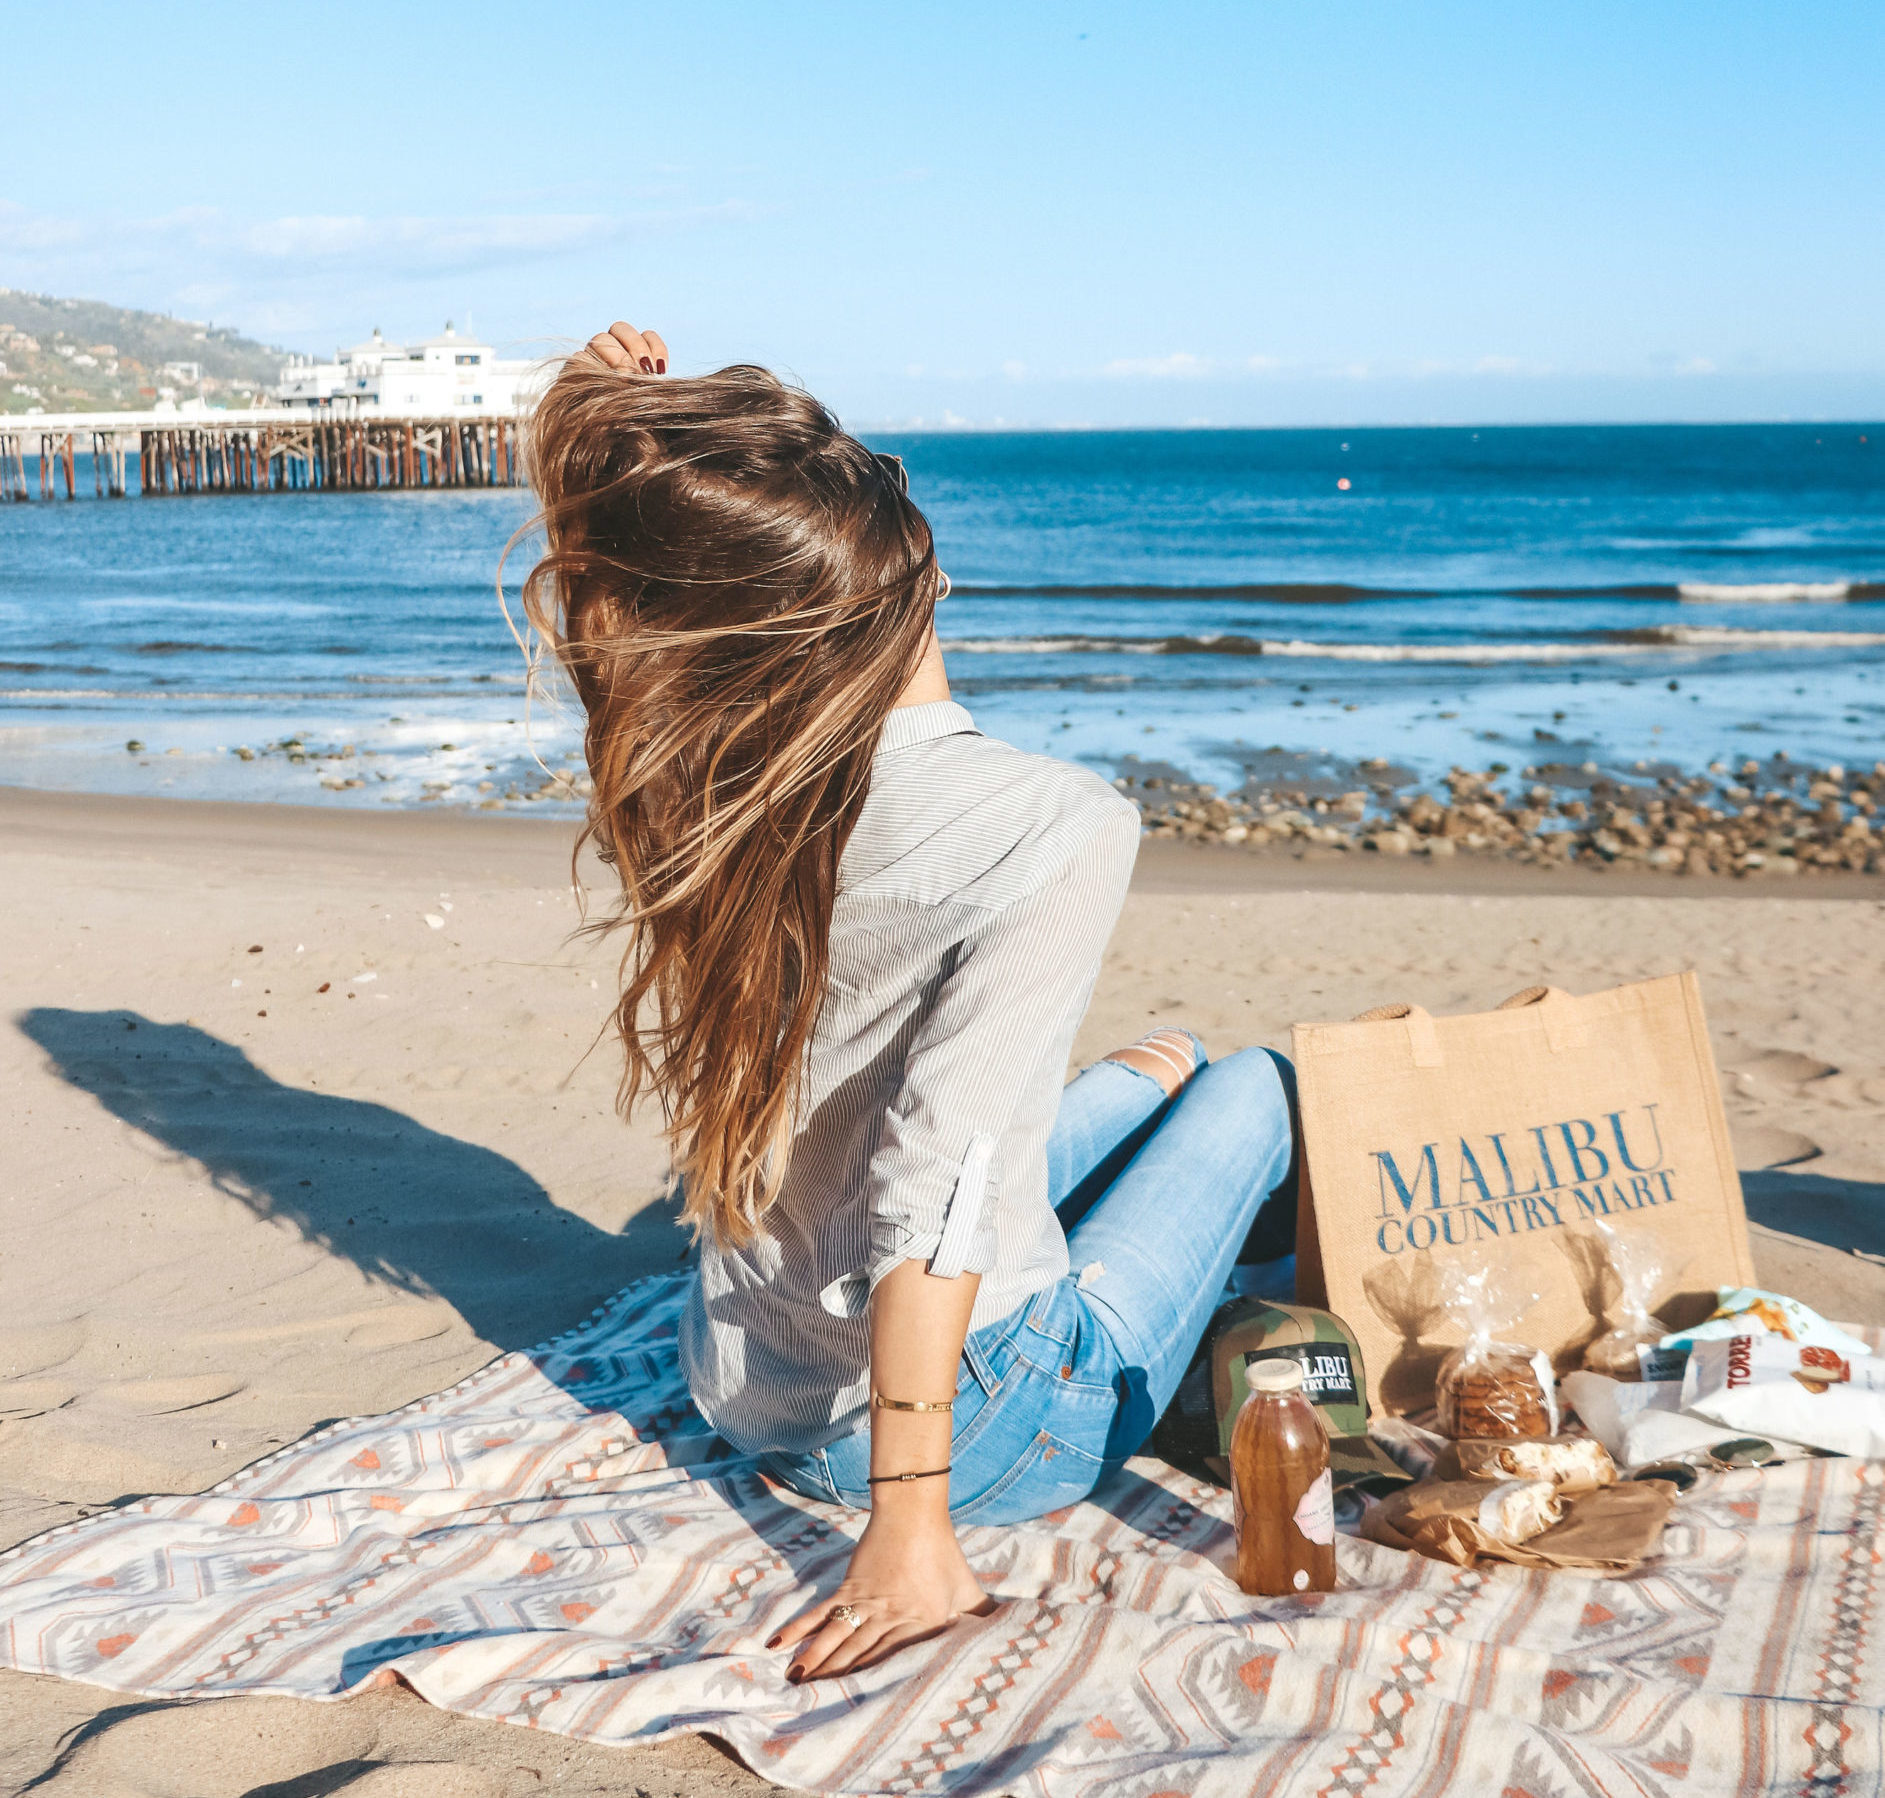 Ready to enjoy a beach day? Don't forget to grab your Malibu Country Mart favorites!